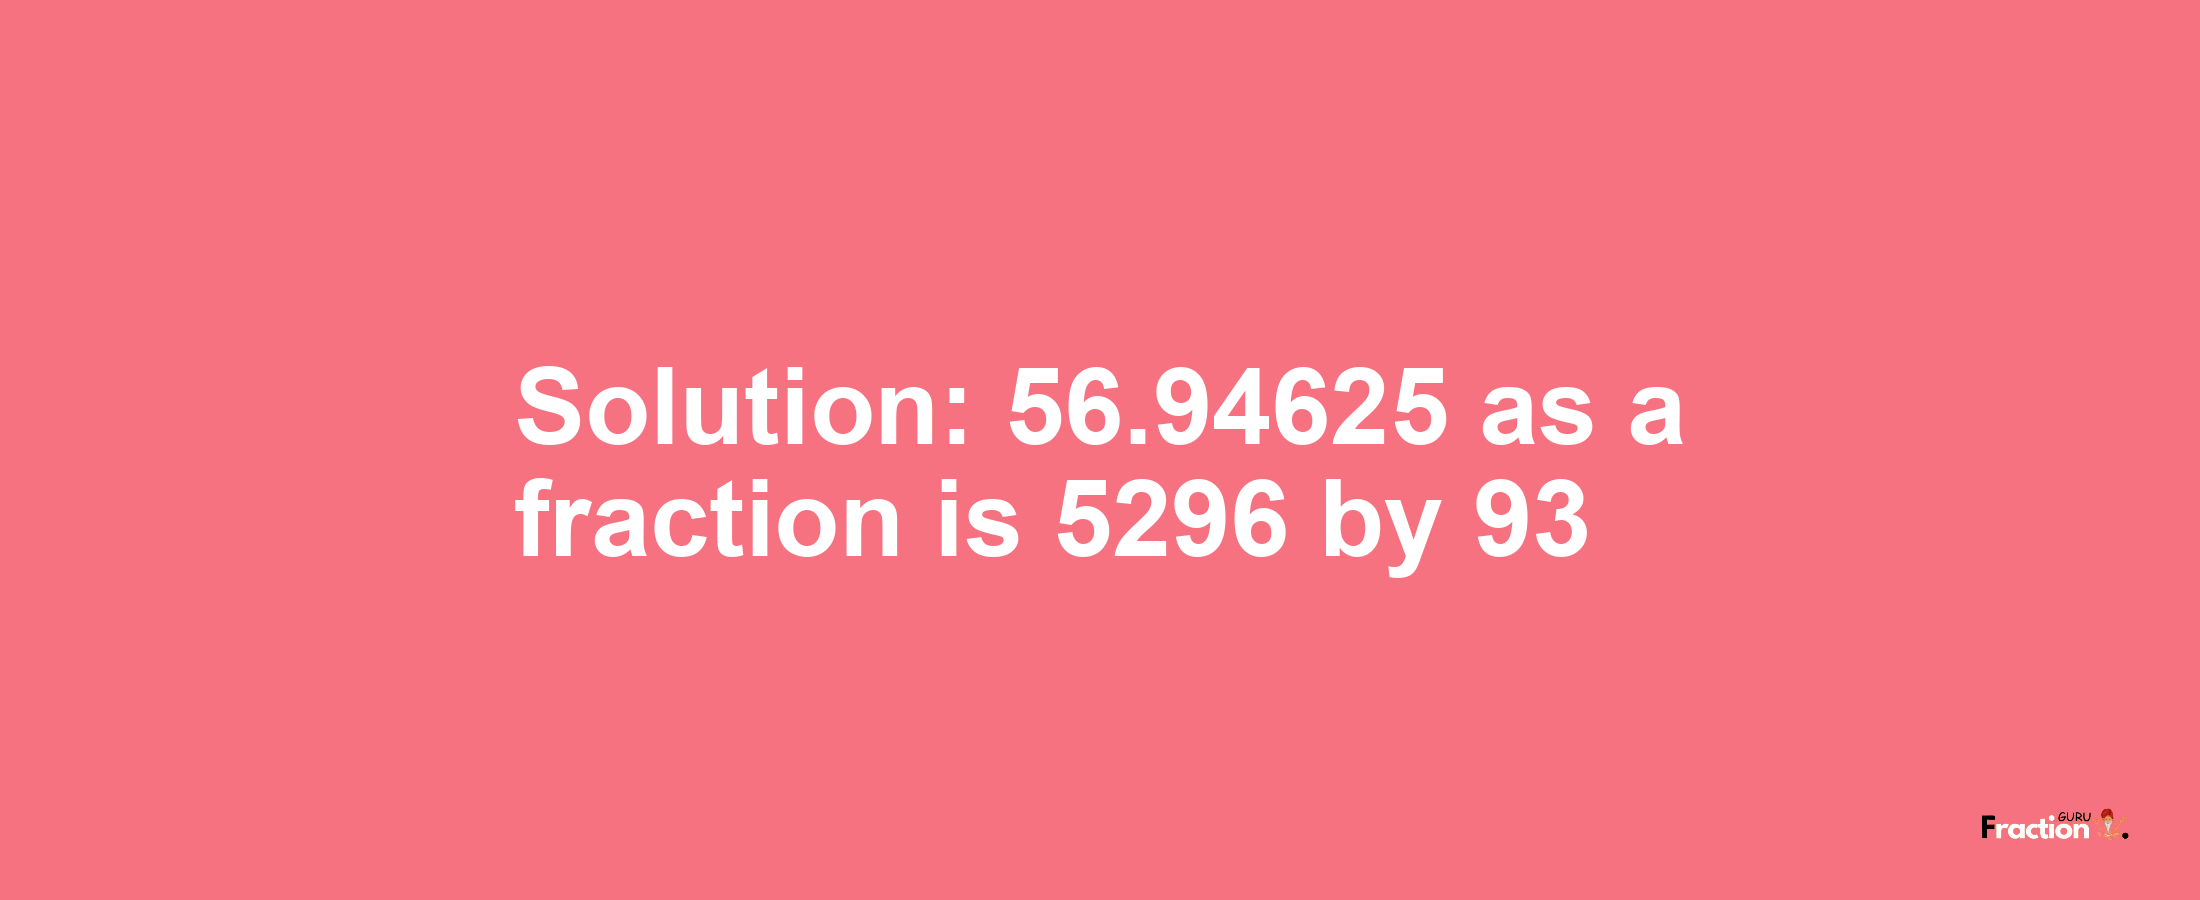 Solution:56.94625 as a fraction is 5296/93